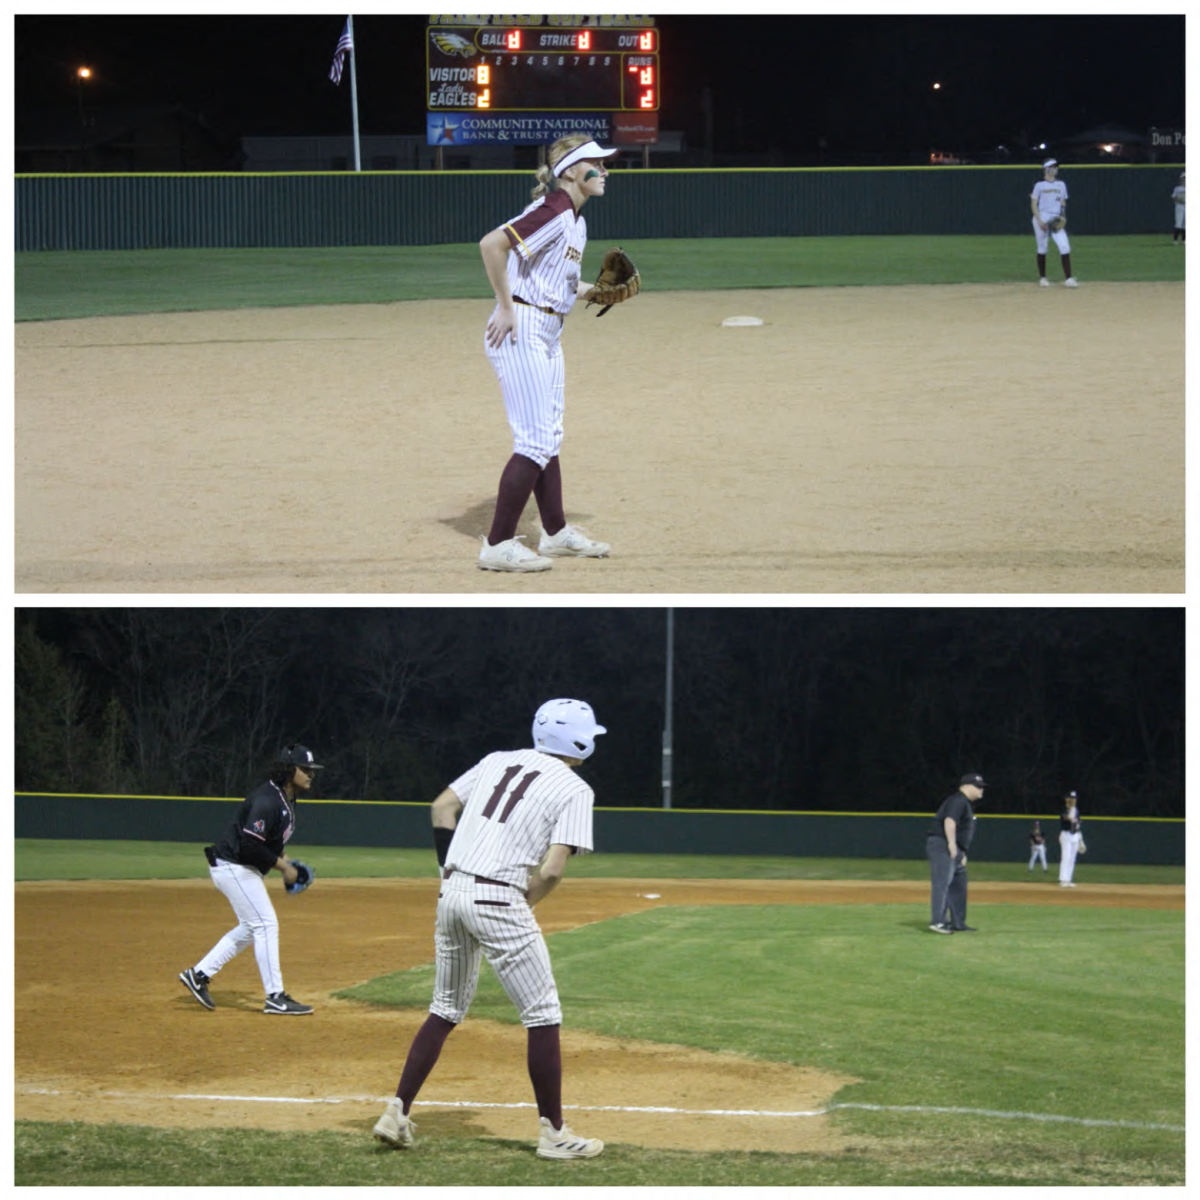 Top: Senior Averie Minze gets ready to field the ball at third base.
Bottom: Senior Cameron Cockerell positions himself to run home from third base.